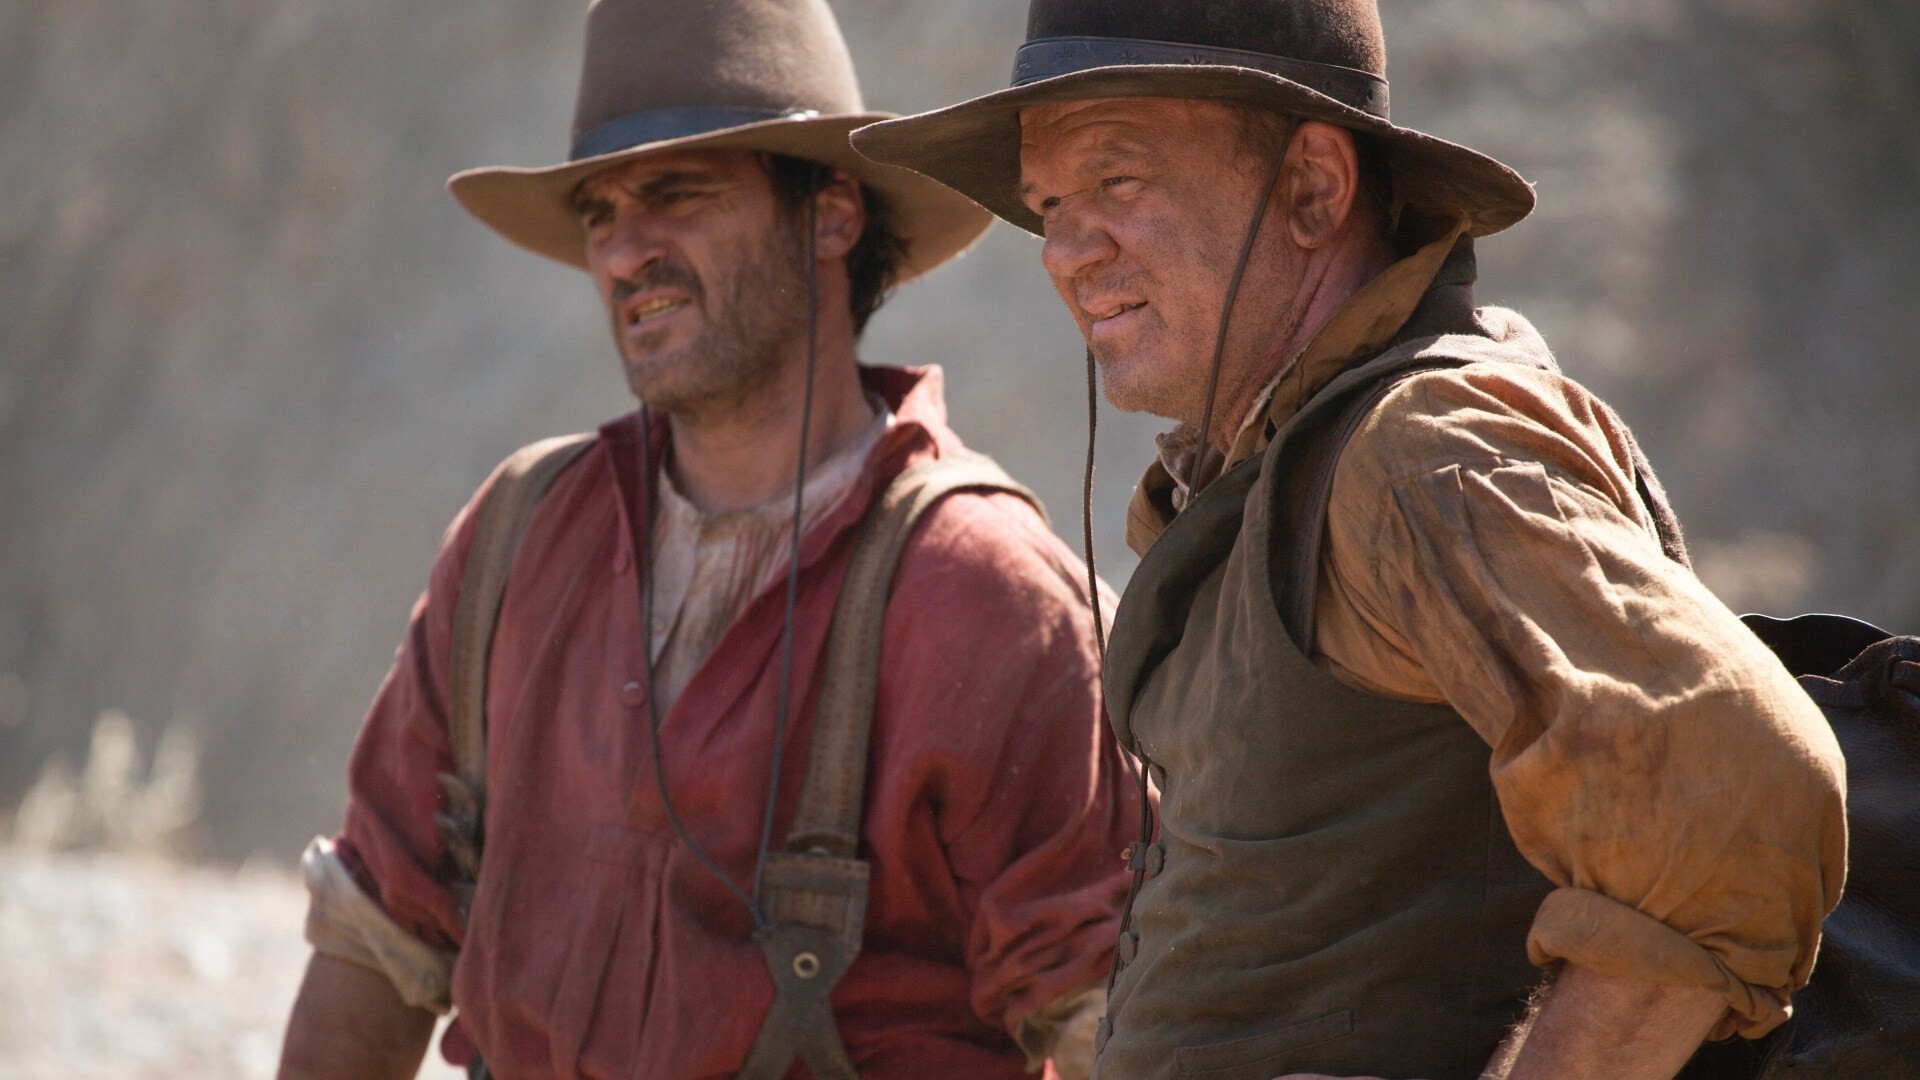 The Sisters Brothers: John C. Reilly, Joaquin Phoenix, A 2018 Western film directed by Jacques Audiard. 1920x1080 Full HD Wallpaper.